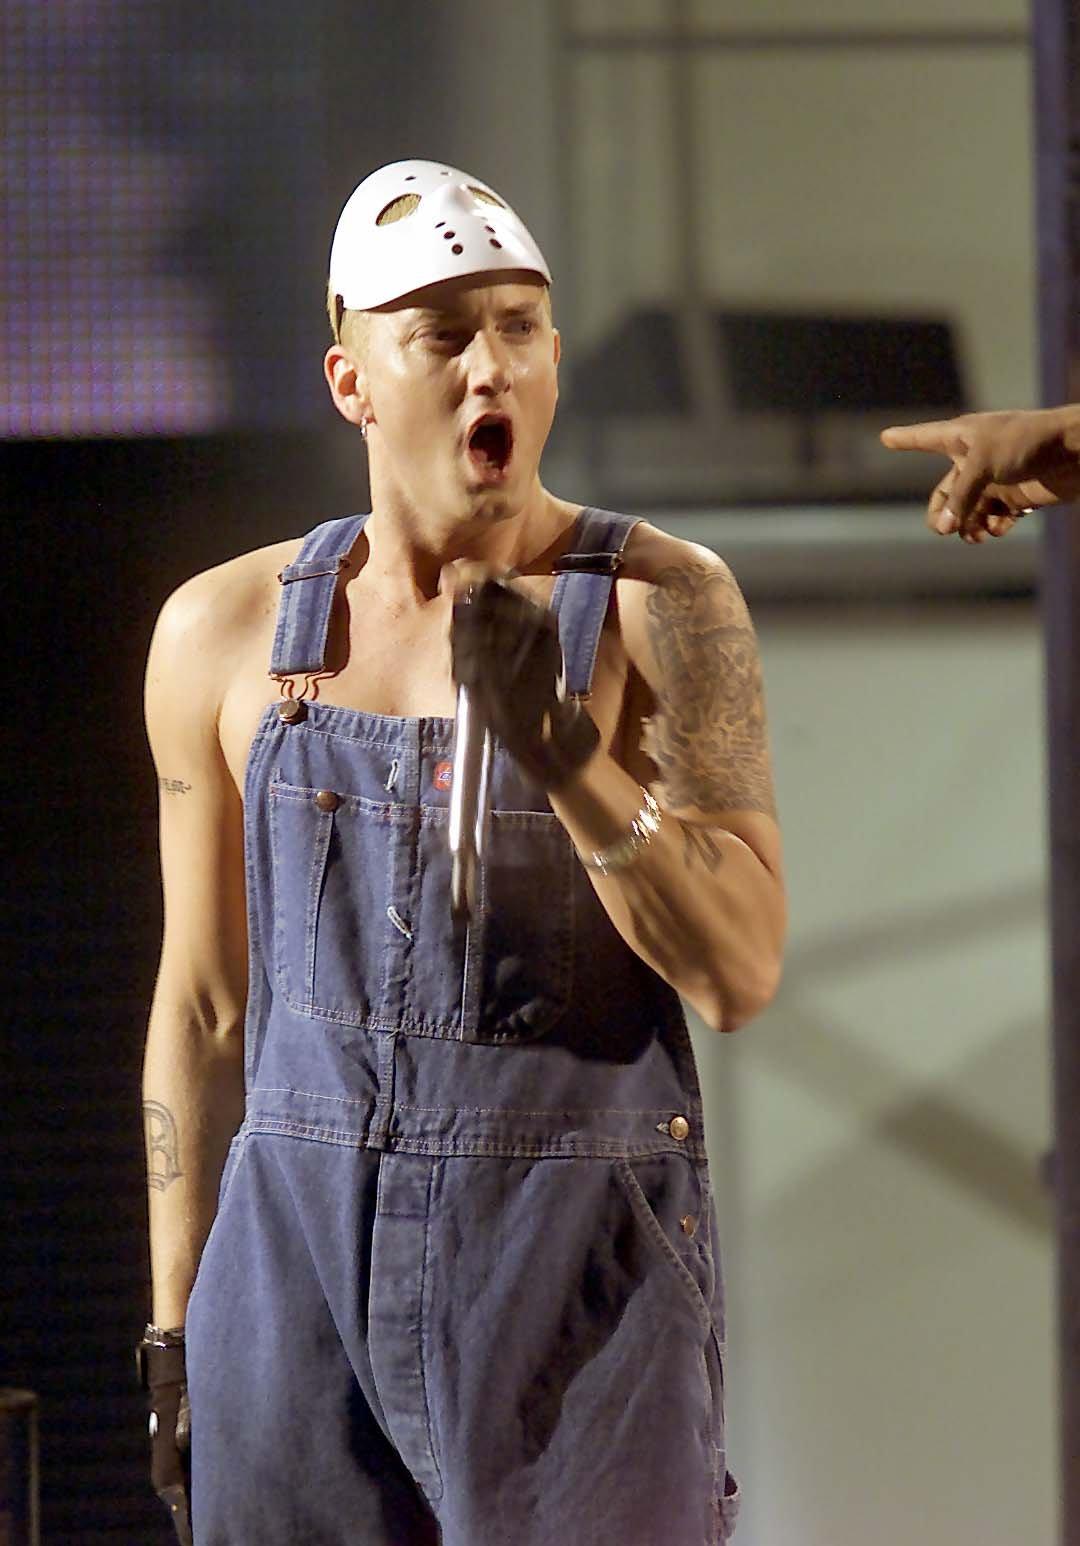 U S rapper Eminem during his performance at the the Brits 2001 music awards event in London apos s Earls Court Monday Feb 26 2001 Eminem won the Best International Male Artist award Photo Richard Pohle